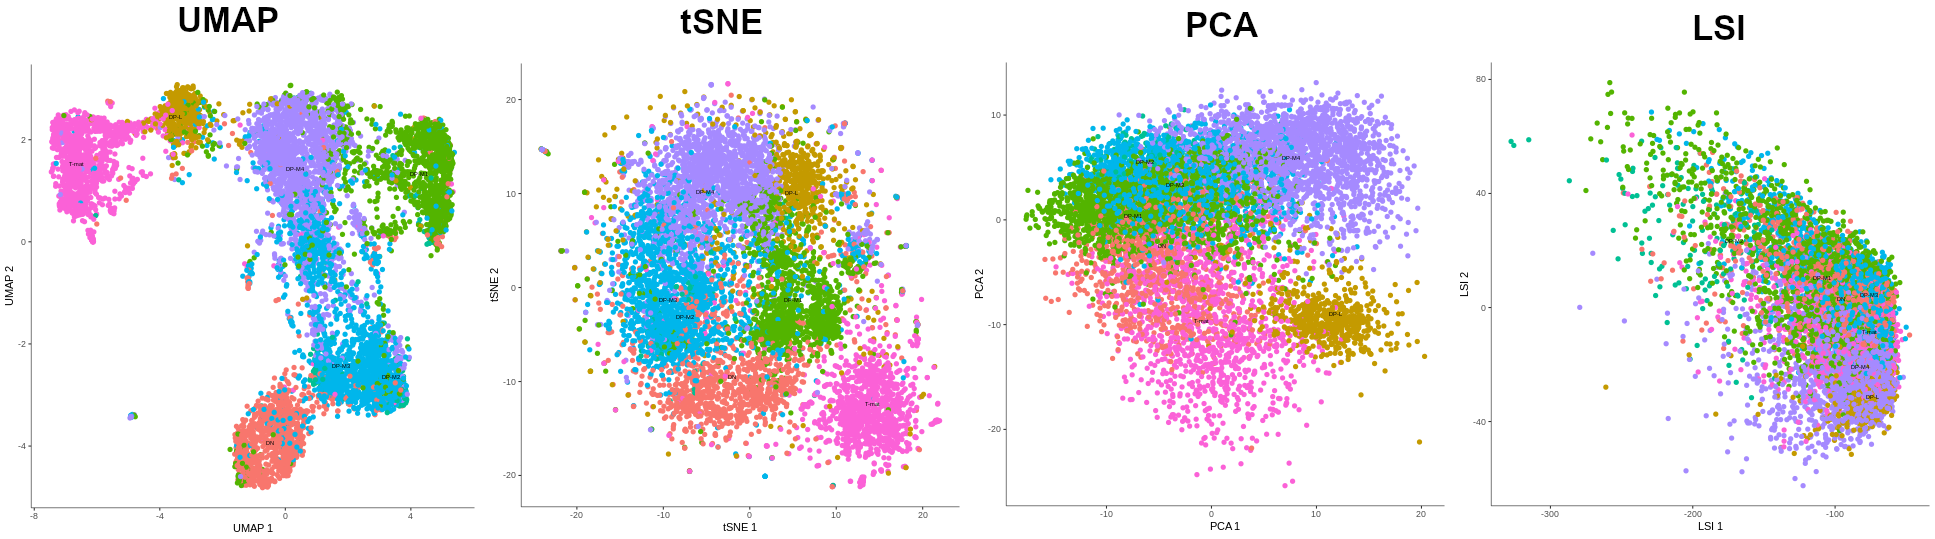 Four graphs showing the alignment of cell types depending on the algorithm of dimentionality reduction that was chosen: UMAP, tSNE, PCA, LSI. UMAP shows distinct cell groups, transitioning smoothly from one to another, creating kind of semicircle. tSNE shows distinct cell groups, however no smooth transitions are observed, all groups gathered into one big grouping. PCA shows cell groups whose boundaries are blurred between each other. On LSI graph, the cell types are all mixed together.